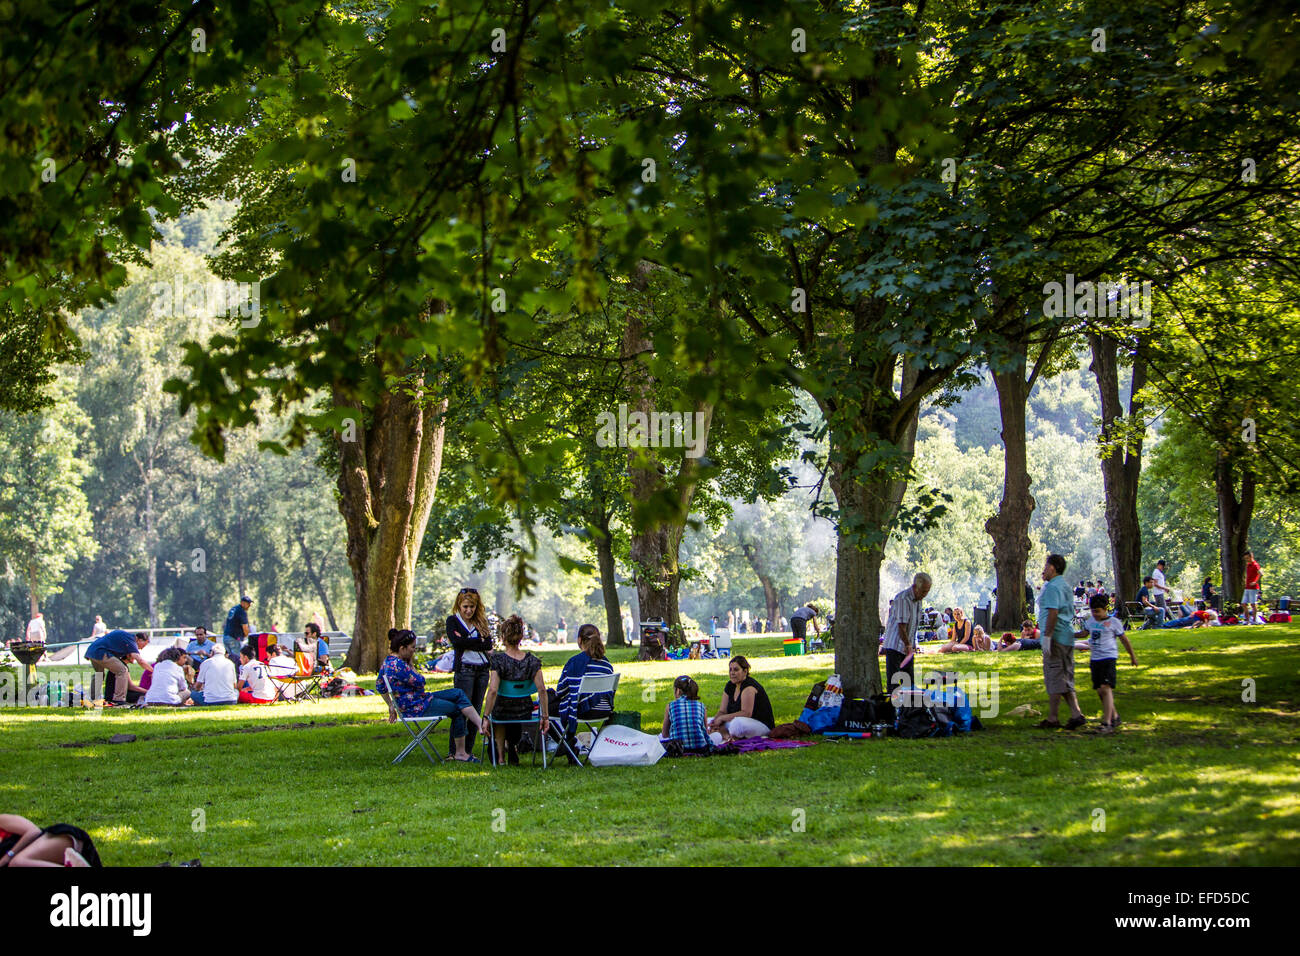 Park at the banks of river Ruhr Essen, Germany, recreational area in summer, BBQ place, Stock Photo